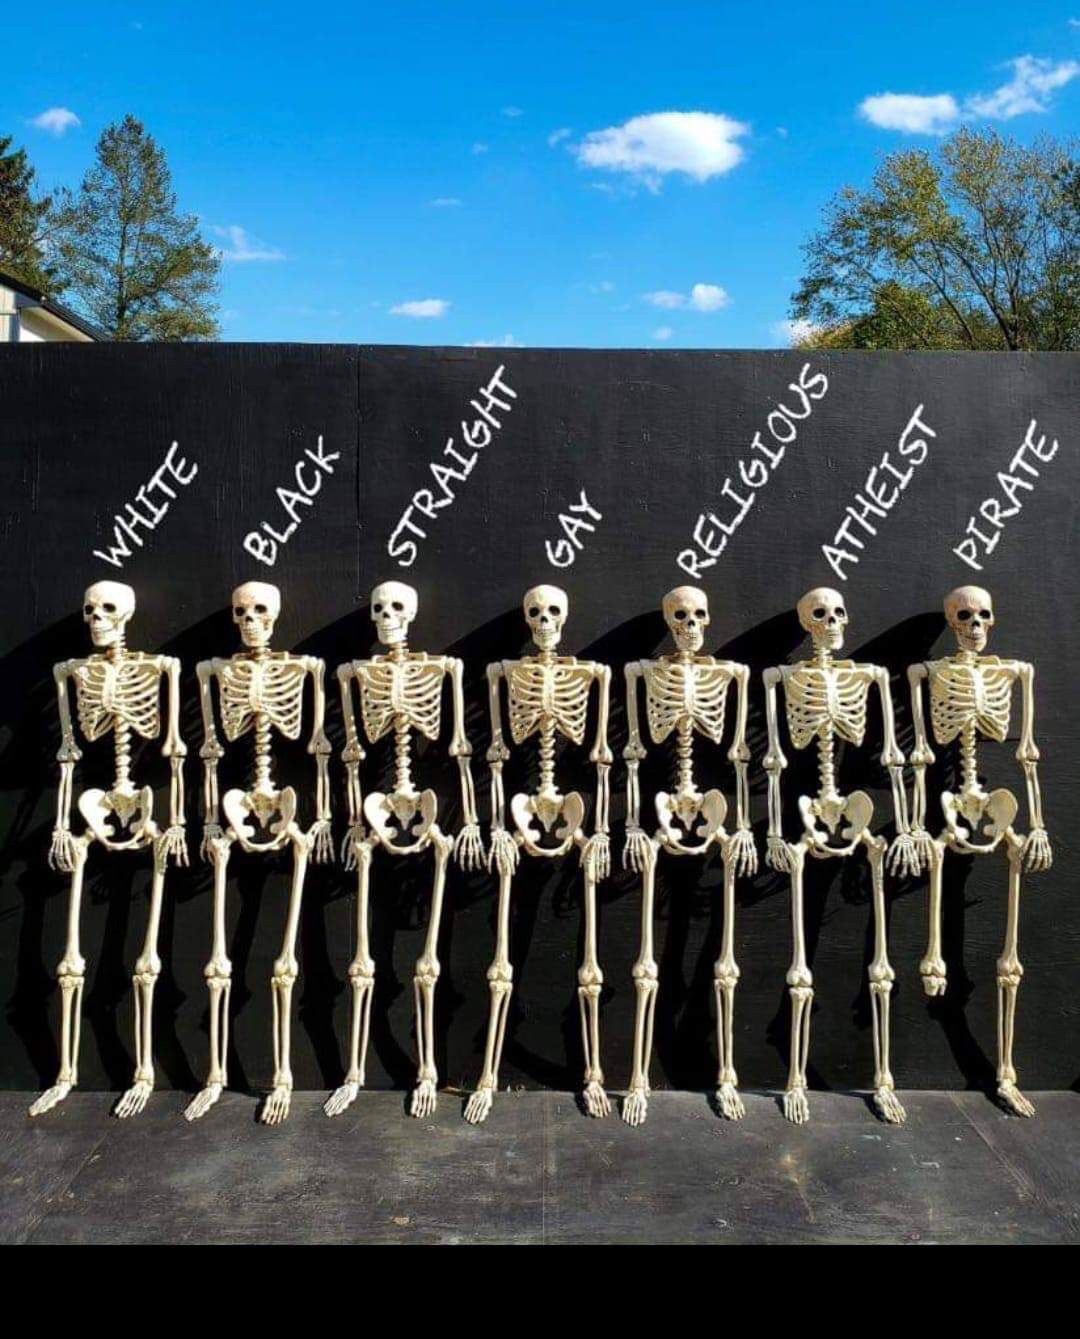 We are all the same, almost all the same.